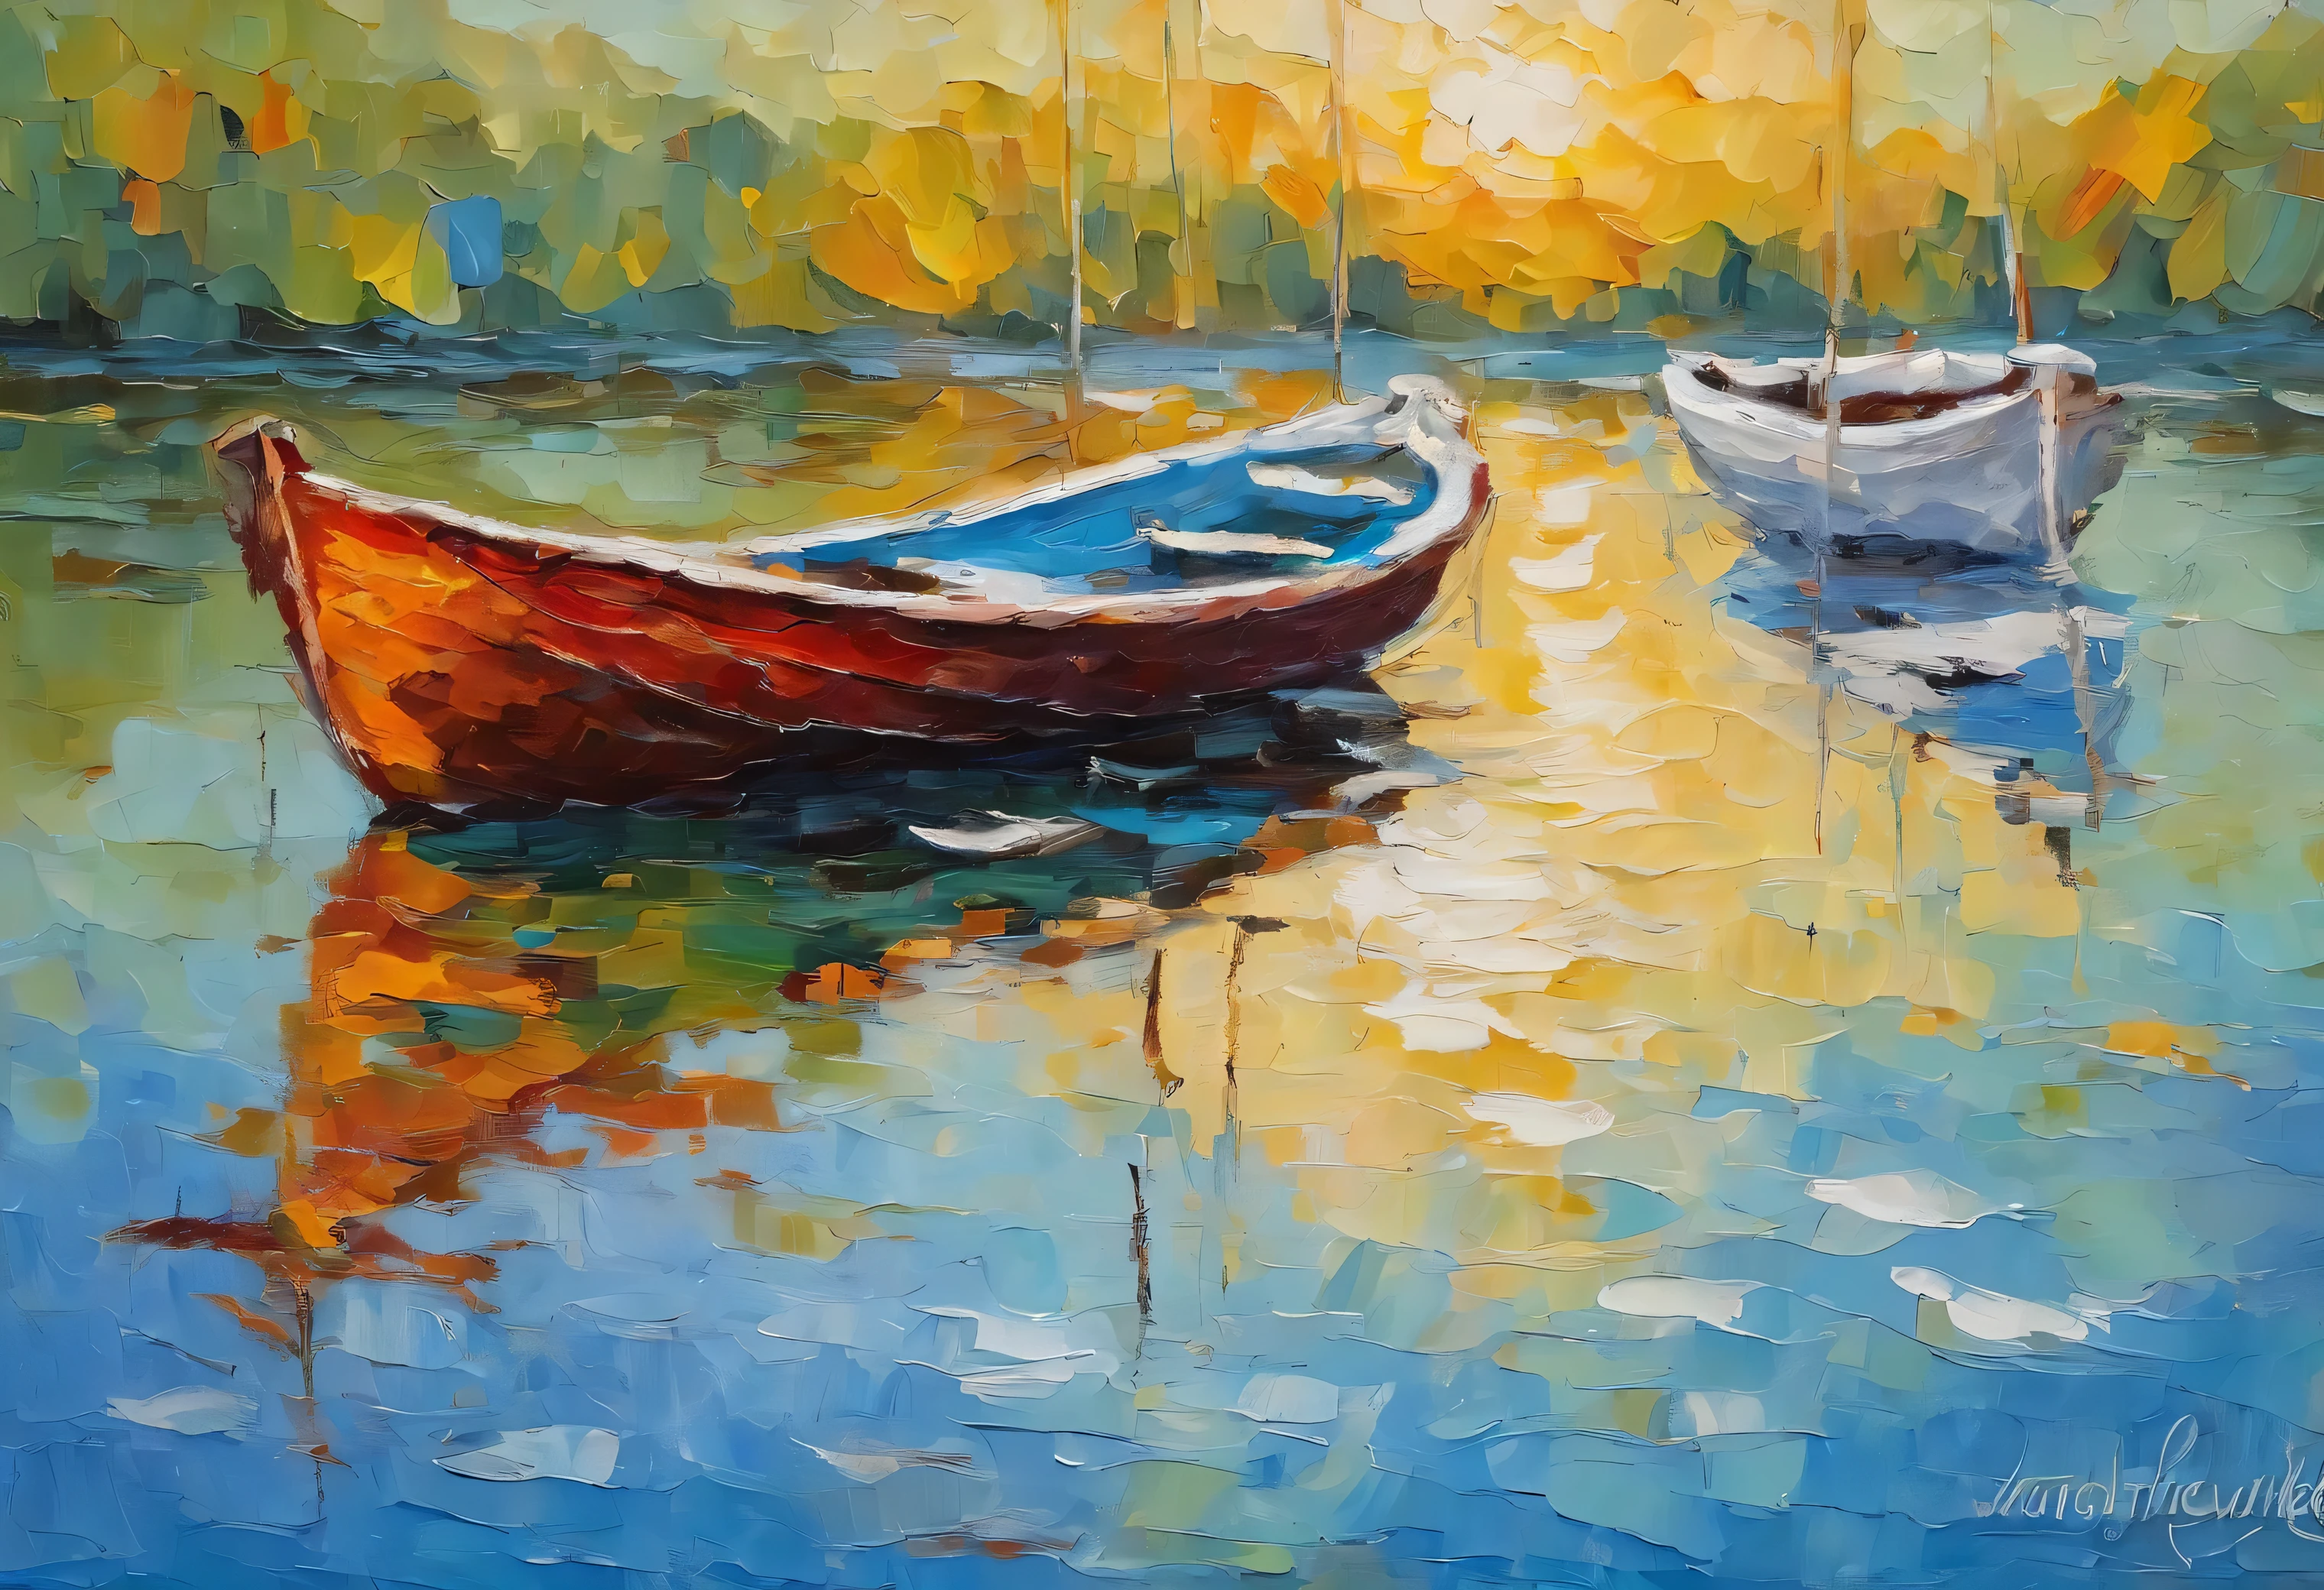 One fisherman boat, perfect reflections, spring sunny day, calm blue sea, impasto style brushstrokes, seagulls in the sky